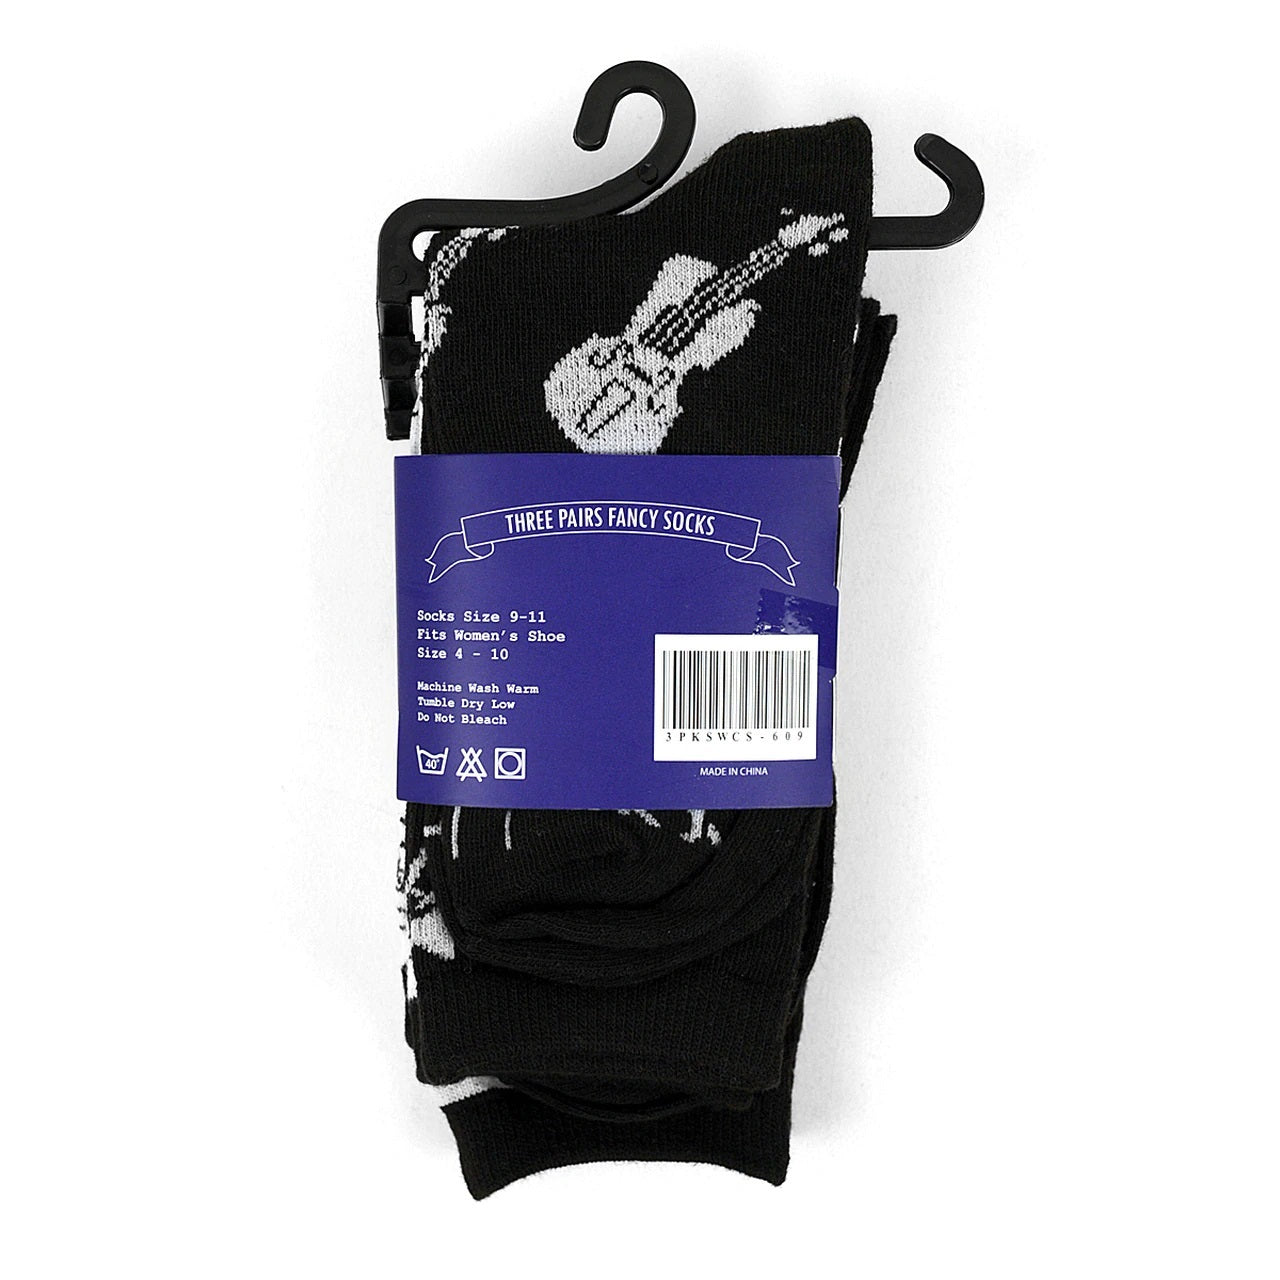 3 pairs Women's Music Theme Novelty Socks  Add some fun to your outfit with our Novelty Socks. This 3 Pack of womens novelty crew socks features a musical theme. These socks are perfect for anyone musical in your life! The socks in this pack have a pair with musical instruments pattern, a piano keys print, and a music notes pattern.  3 pairs per pack 3 different styles 98% Polyester, 2% Spandex Women's 4-10 shoe size Machine wash, tumble dry low Imported